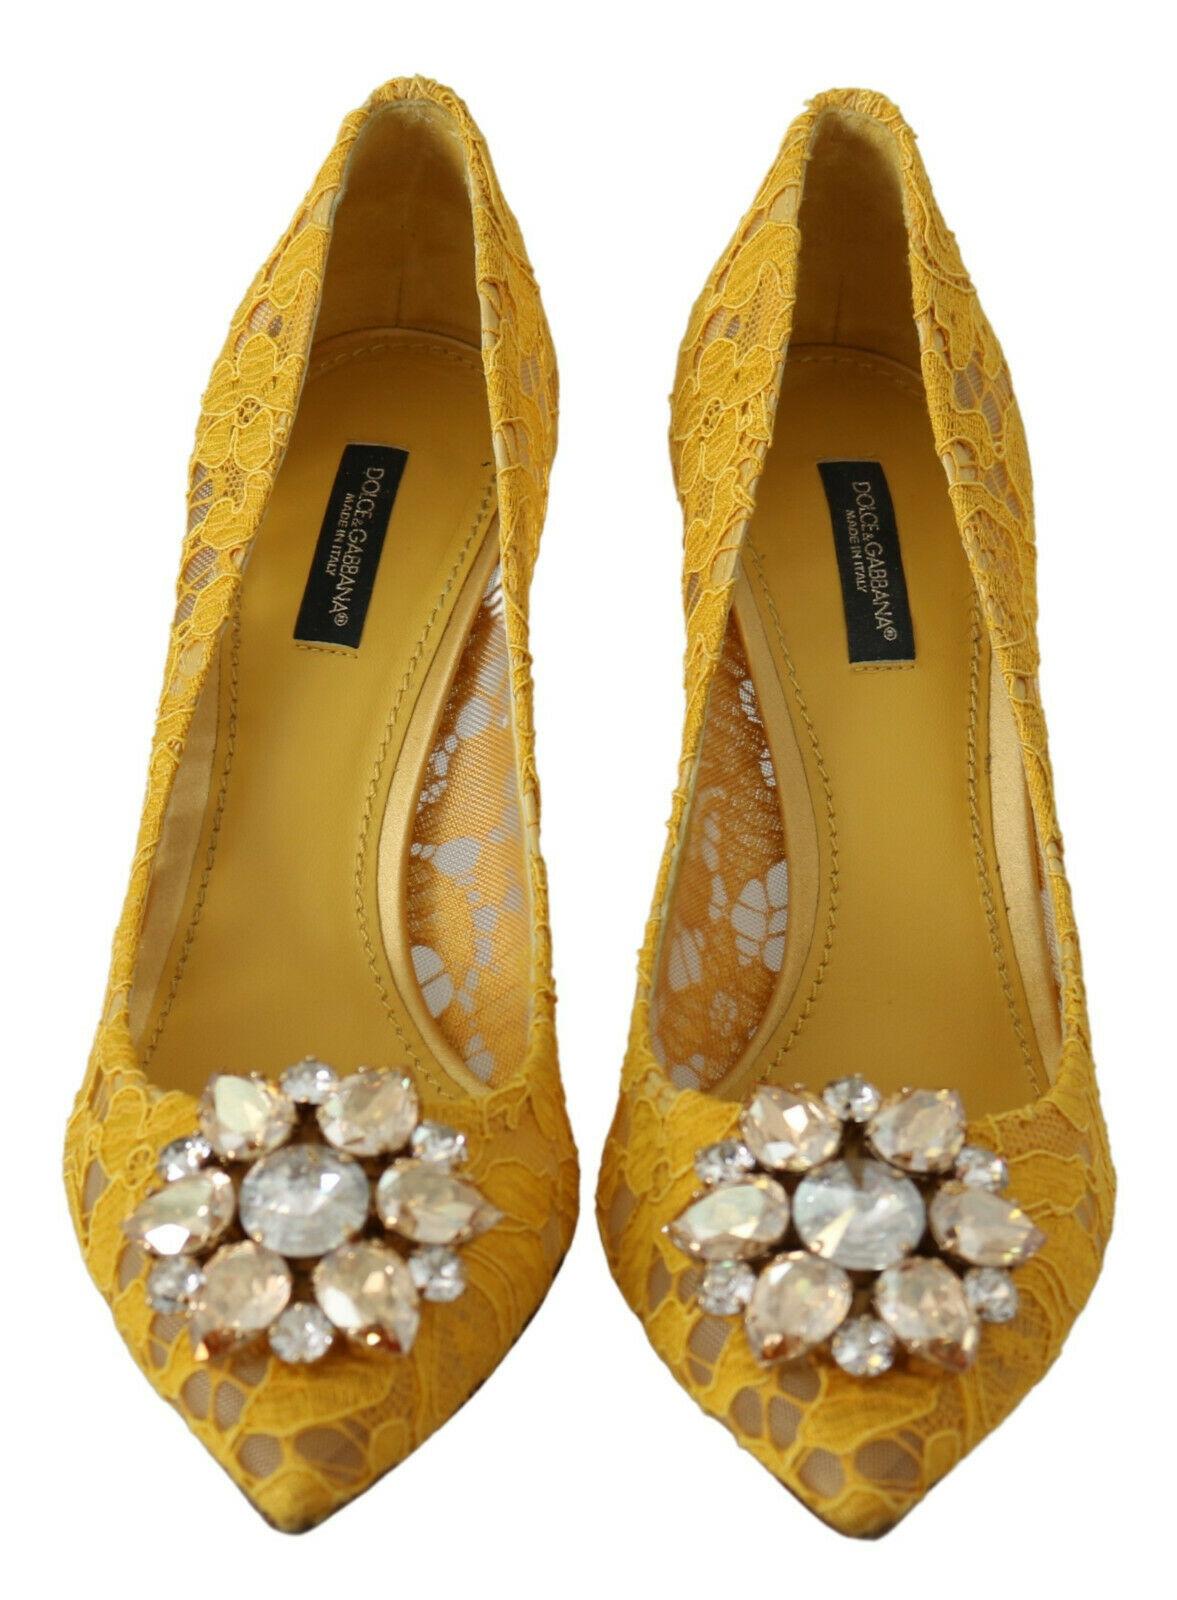 Dolce & Gabbana Yellow Lace Pointy Pumps Heels Shoes Floral Jewel Leather In New Condition In WELWYN, GB